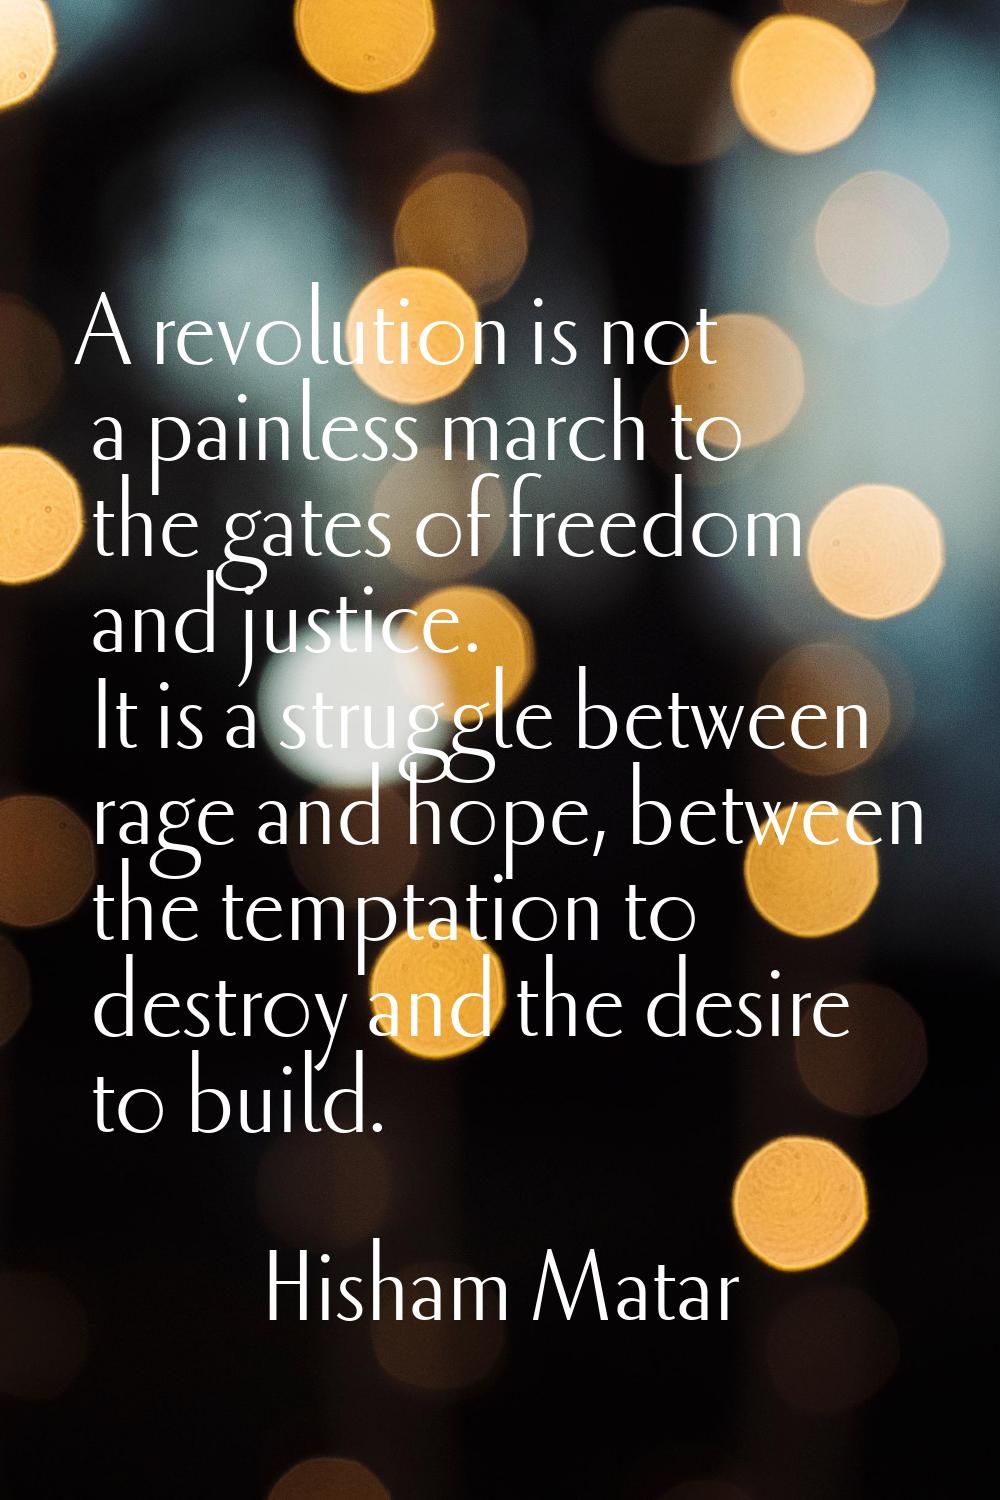 A revolution is not a painless march to the gates of freedom and justice. It is a struggle between 